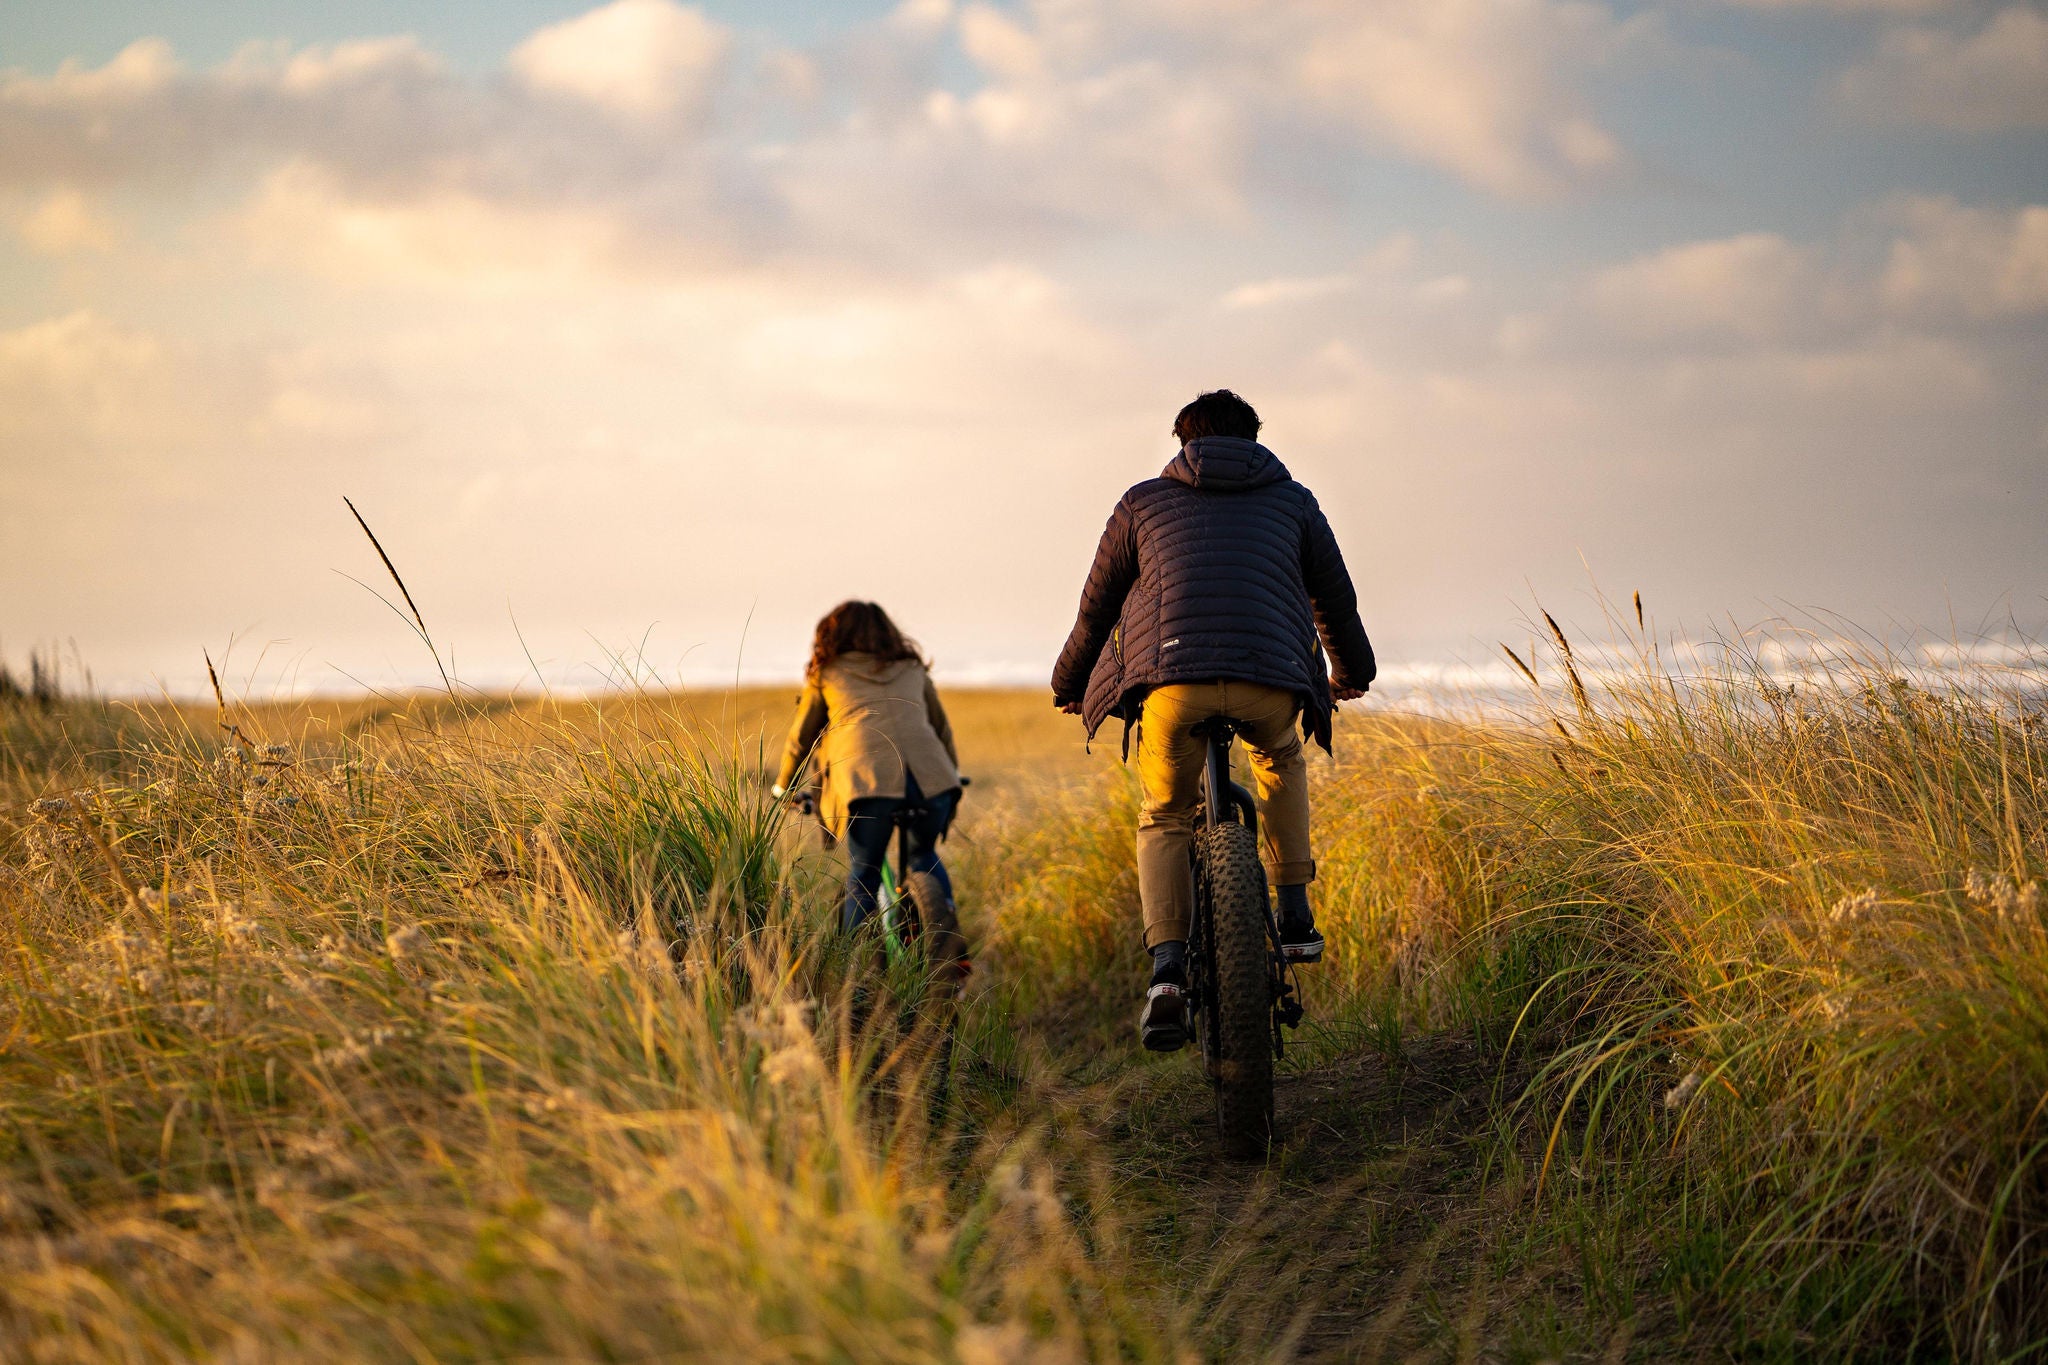 couple ride bicycles through grassy headlands above the ocean